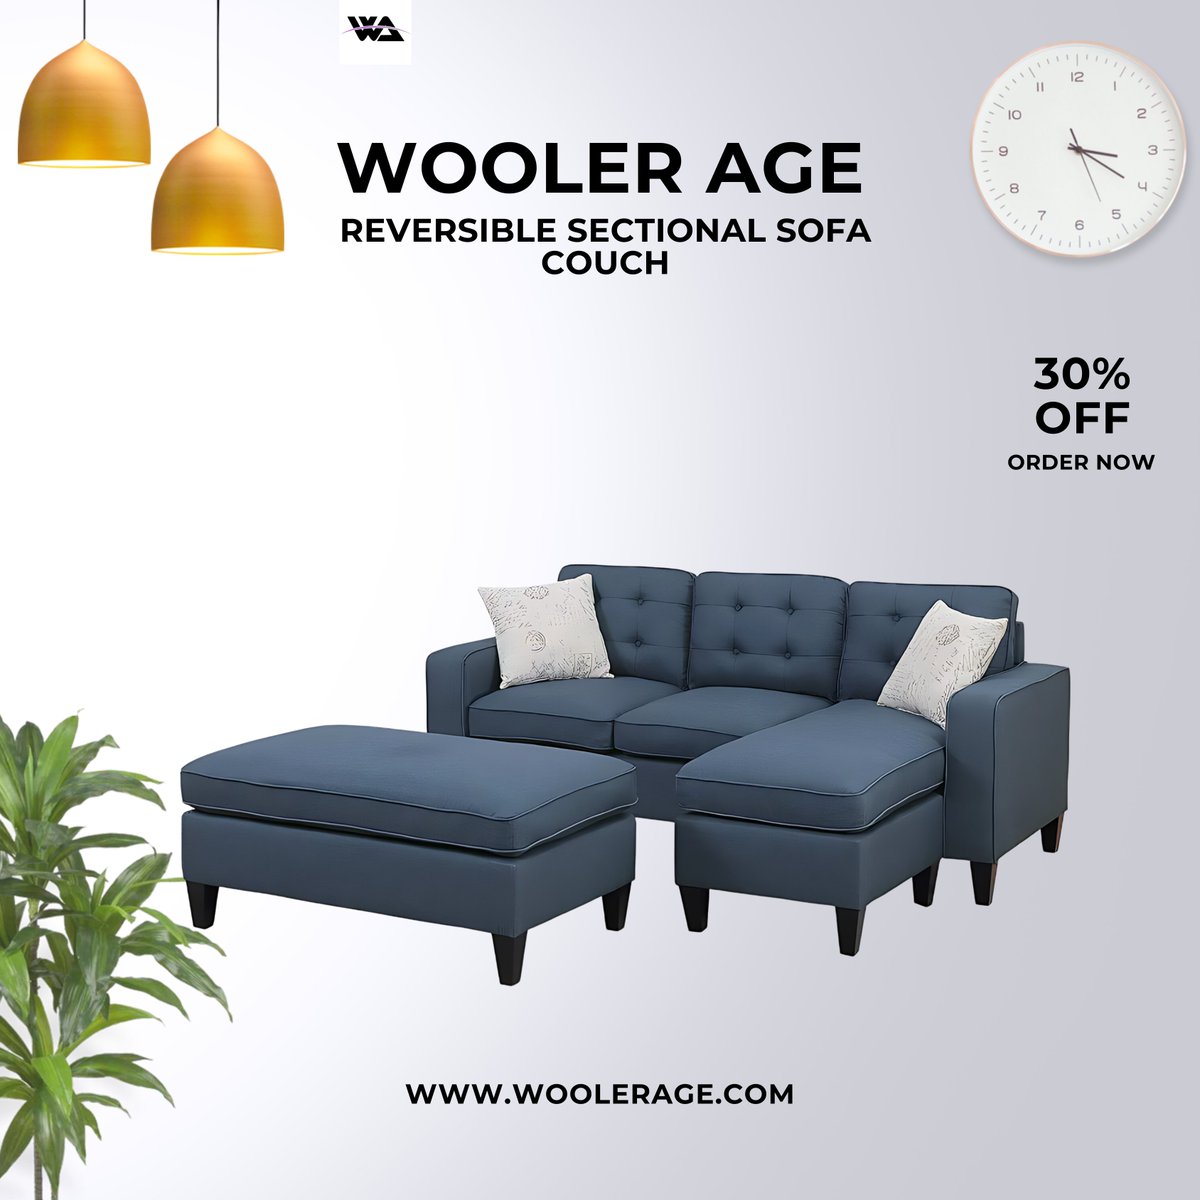 Meet our Woolerage 3-piece Sectional Sofa in navy blue. Luxurious, reversible, and oh-so-comfy! 💙 #Woolerage #SectionalSofa #NavyBlue #HomeComforts #LivingRoomGoals #Sofa #Couch #Furniture #LivingRoom #HomeDecor #InteriorDesign #HomeFurniture #ModernFurniture #Comfort #HomeStyle